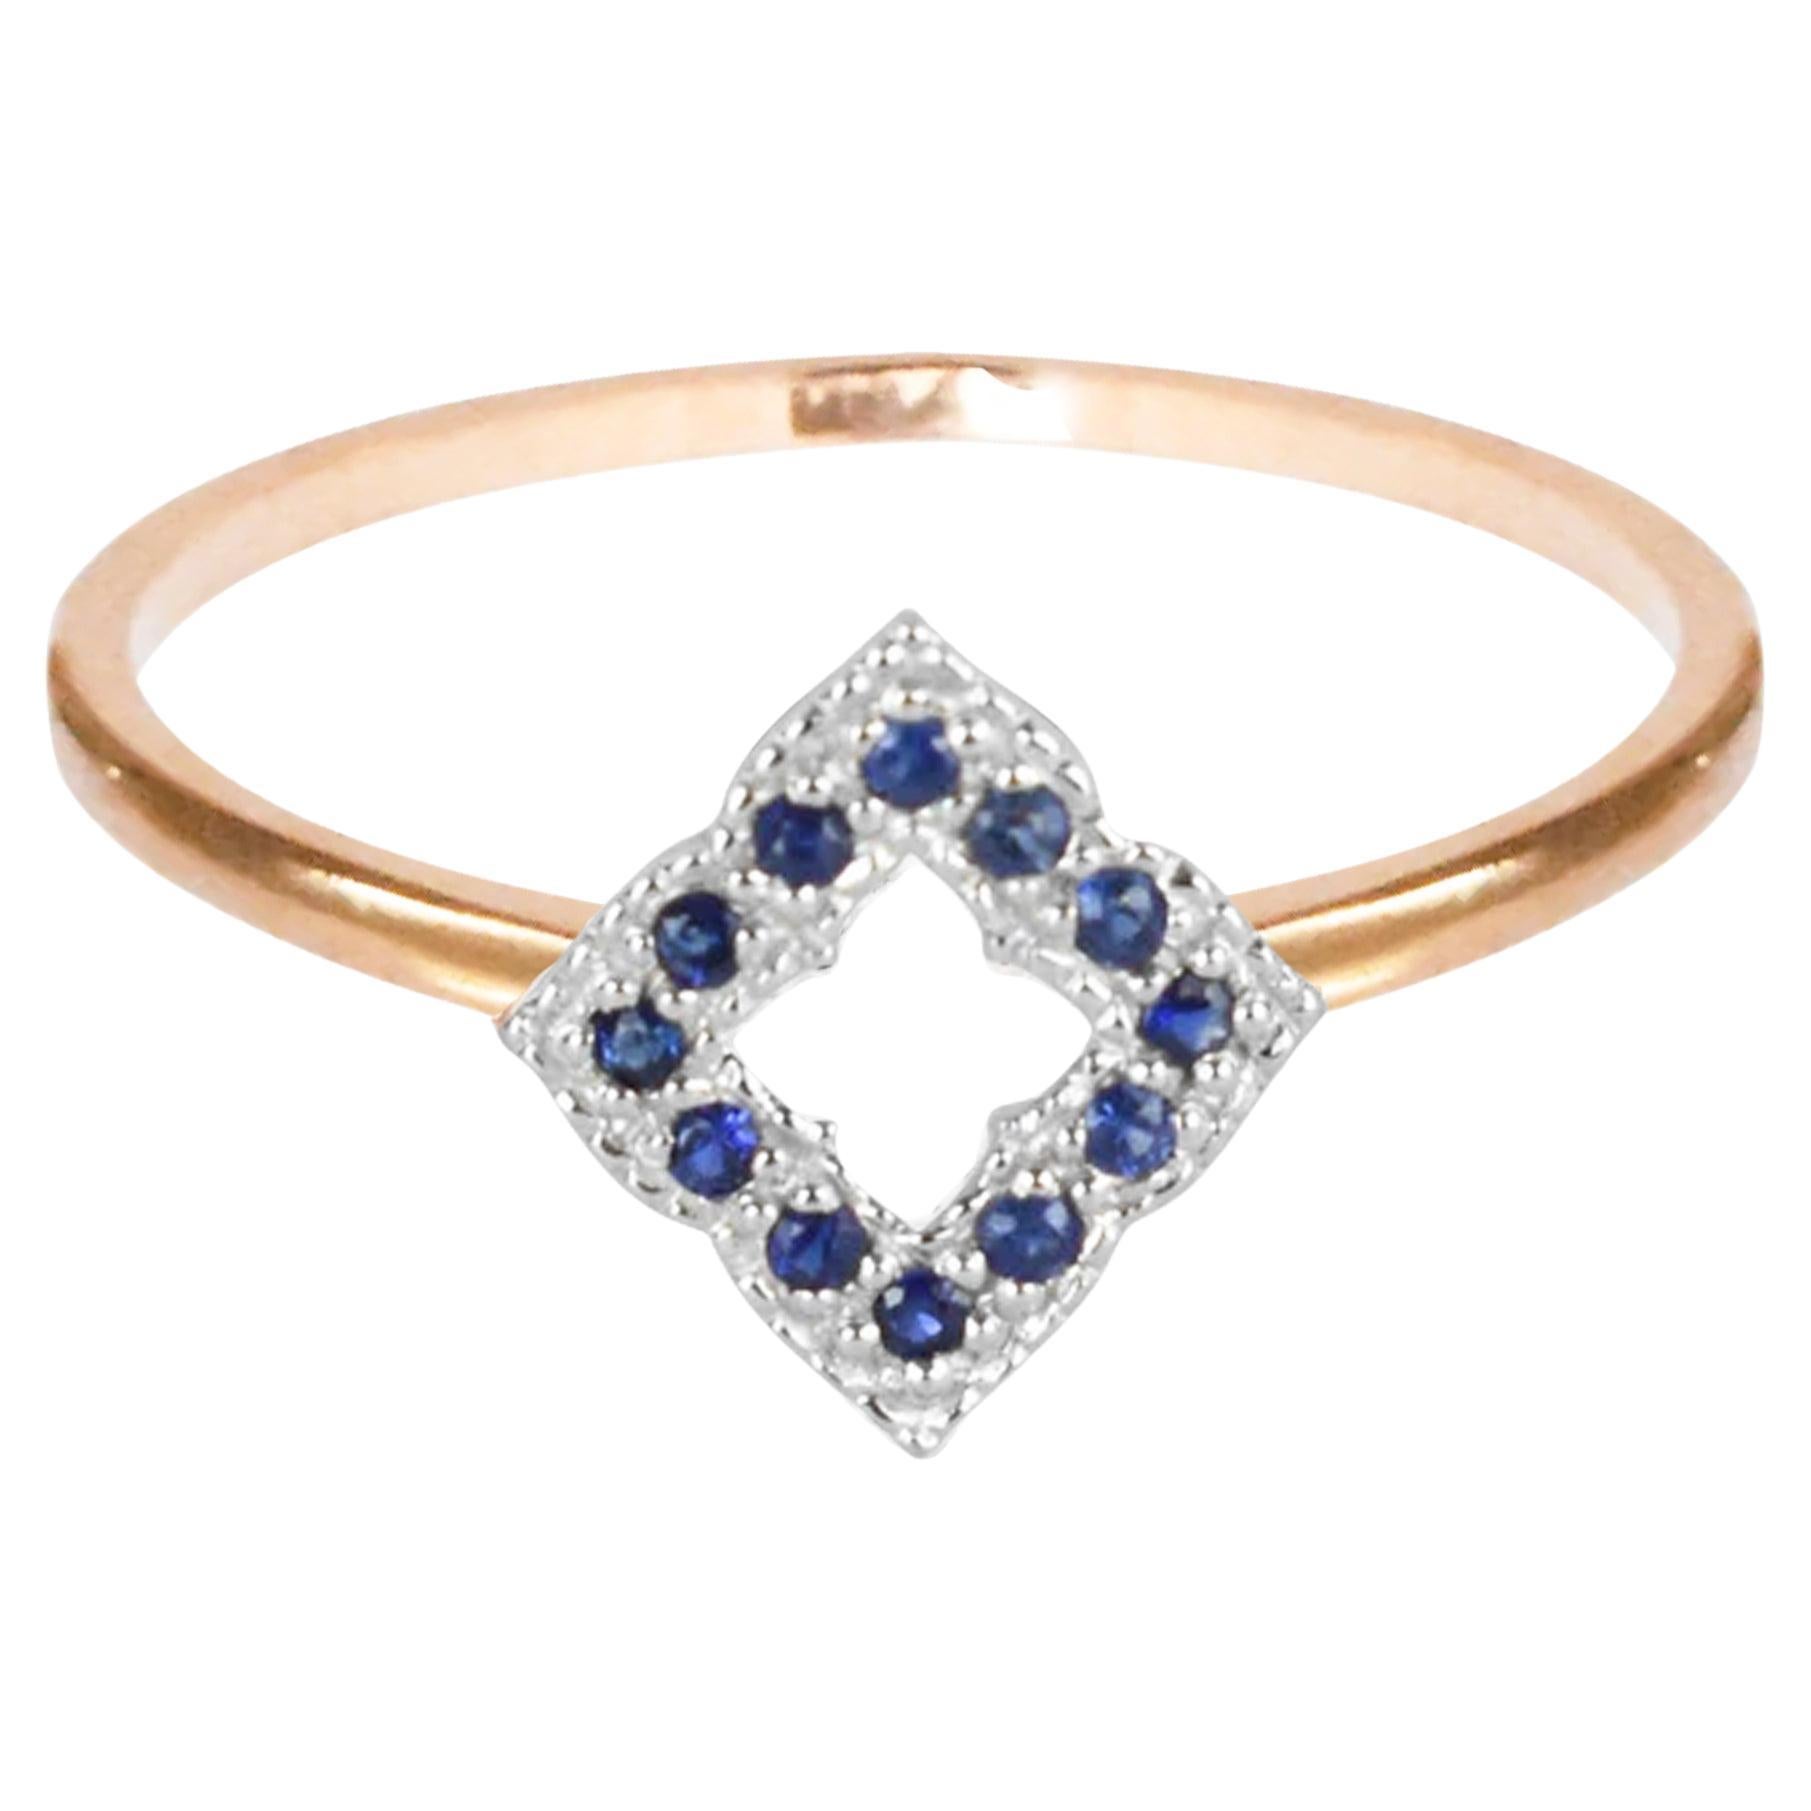 For Sale:  14k Gold 0.10 Carat sapphire clover ring